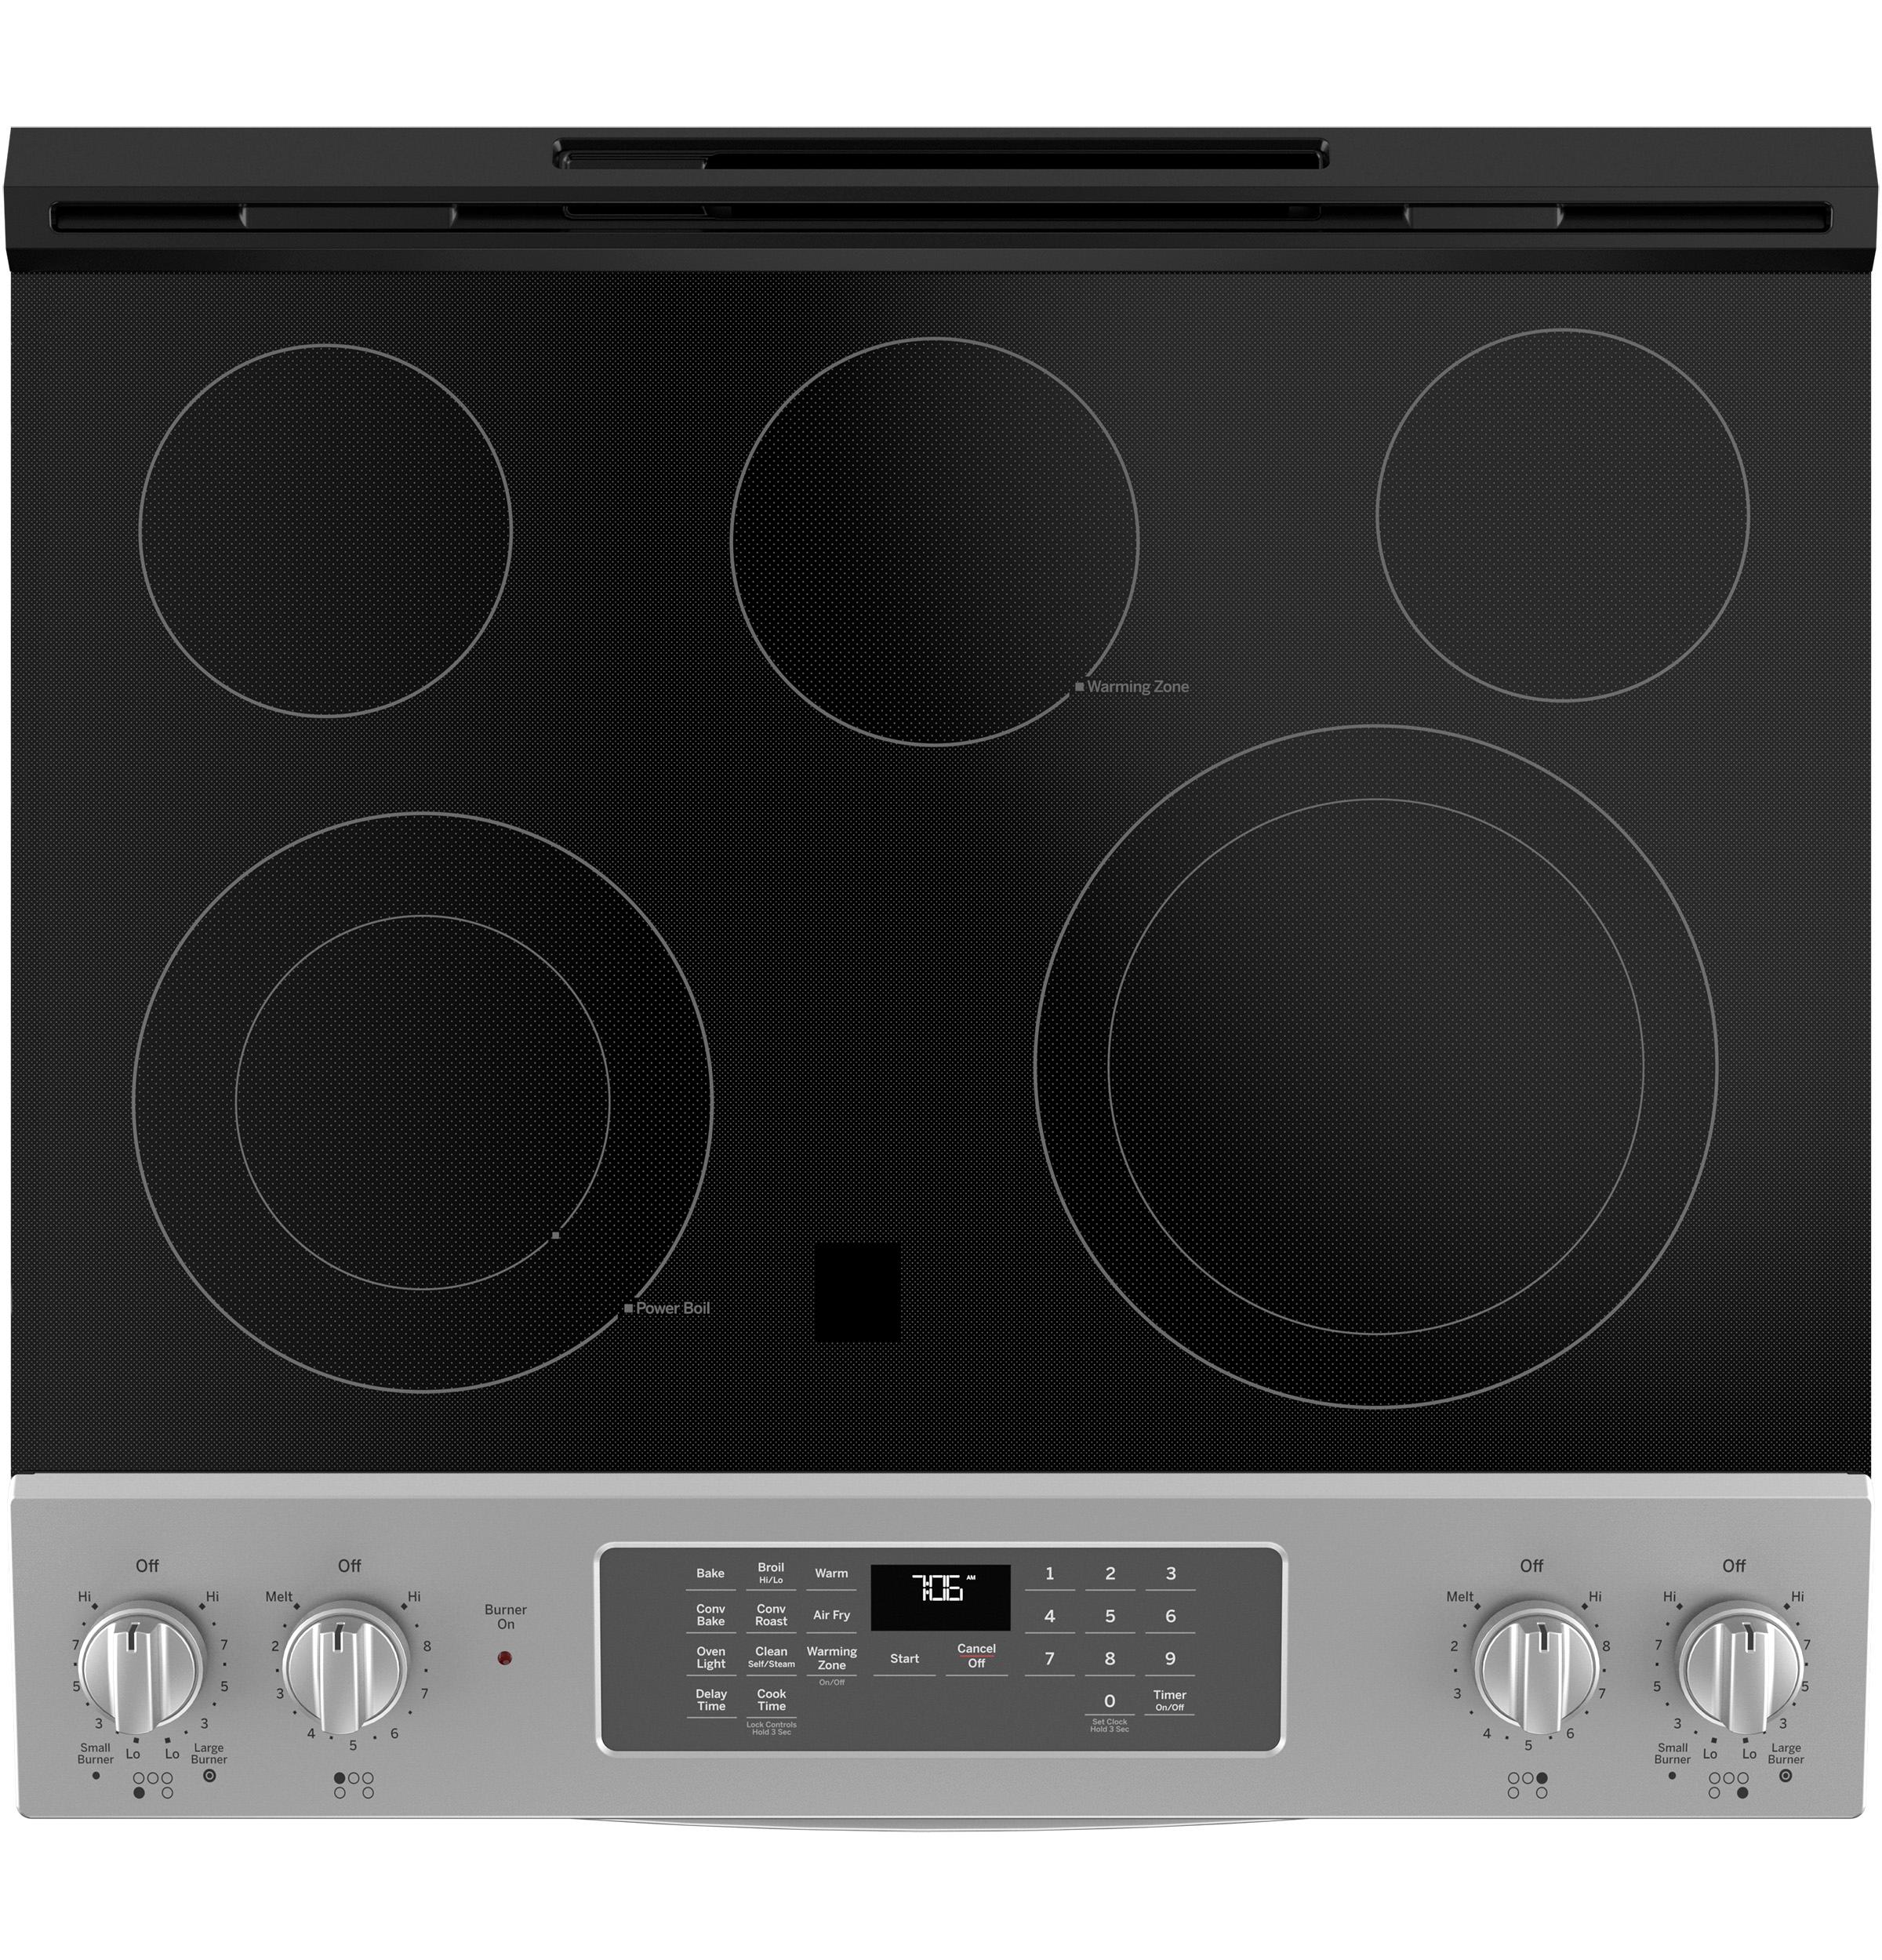 GE APPLIANCES JS760SPSS GE(R) 30 Slide-In Electric Convection Range with No Preheat Air Fry - image 2 of 5